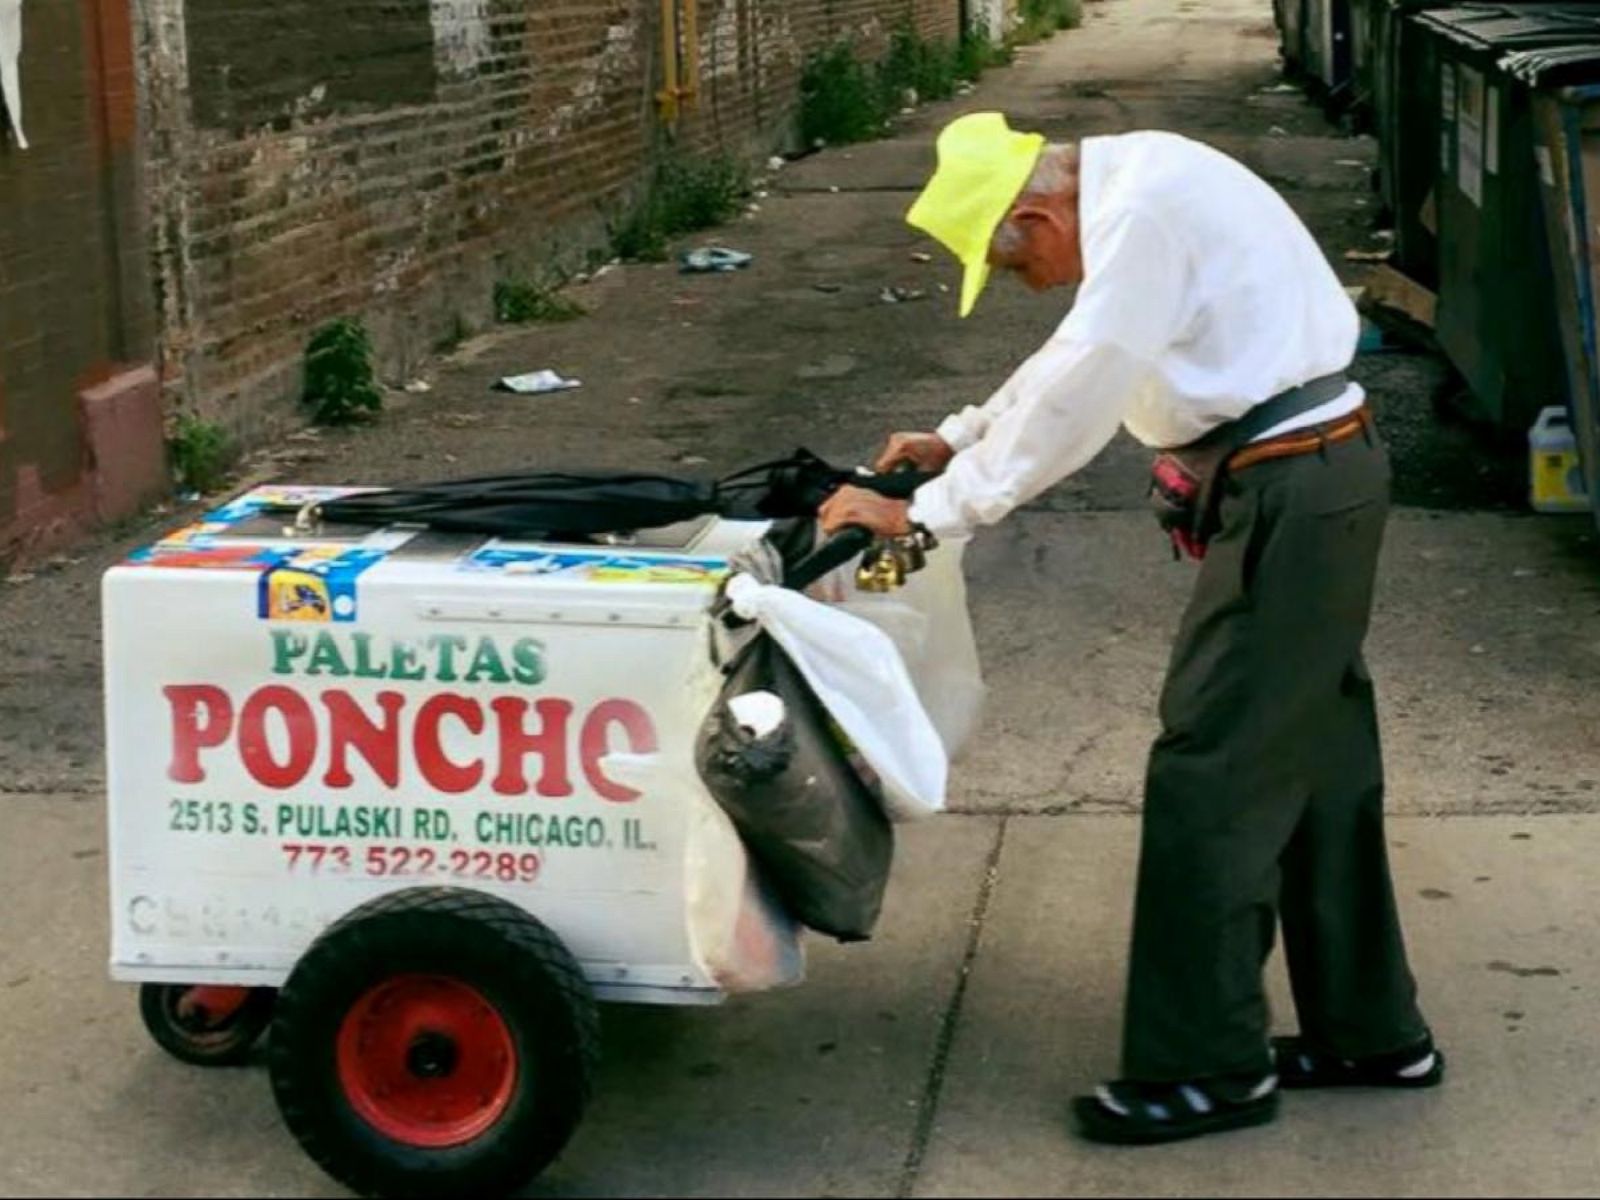 Customer Helps 89-Year-Old Man Who Pushes Ice Cream Cart to Support His Family